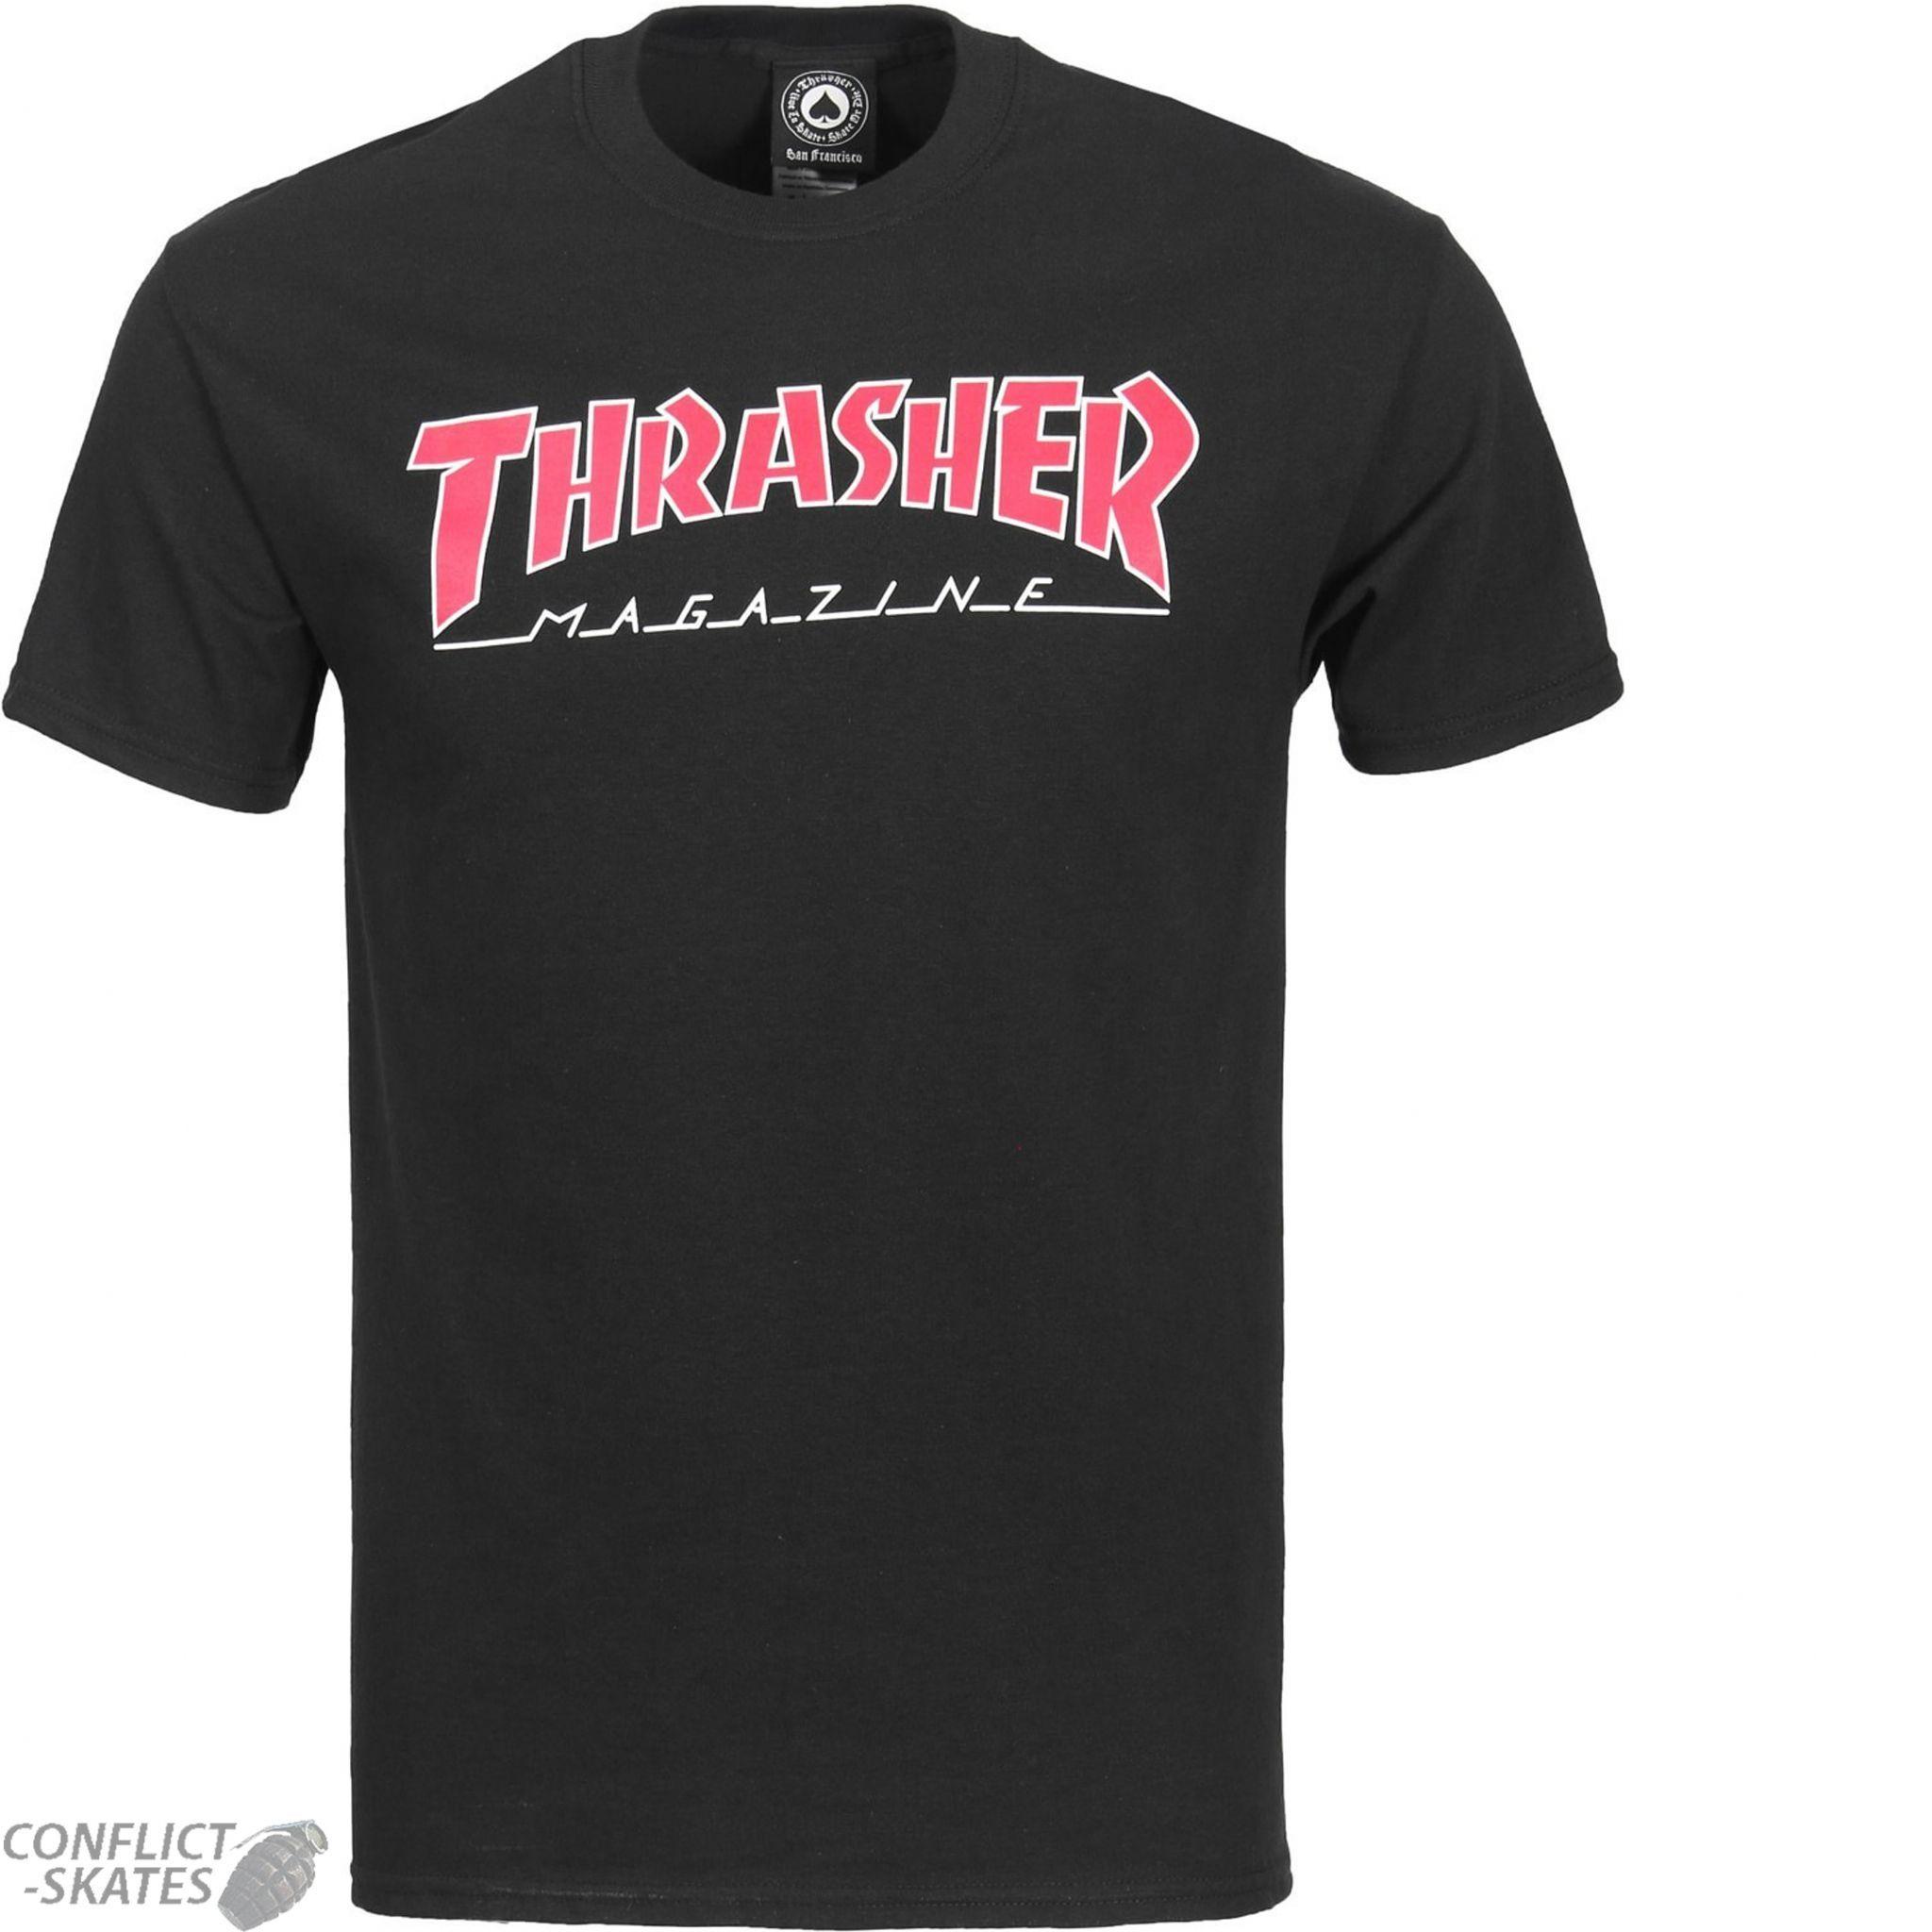 Black and Red S Logo - THRASHER MAGAZINE Outlined Skateboard T-Shirt BLACK Red S M L or XL punk